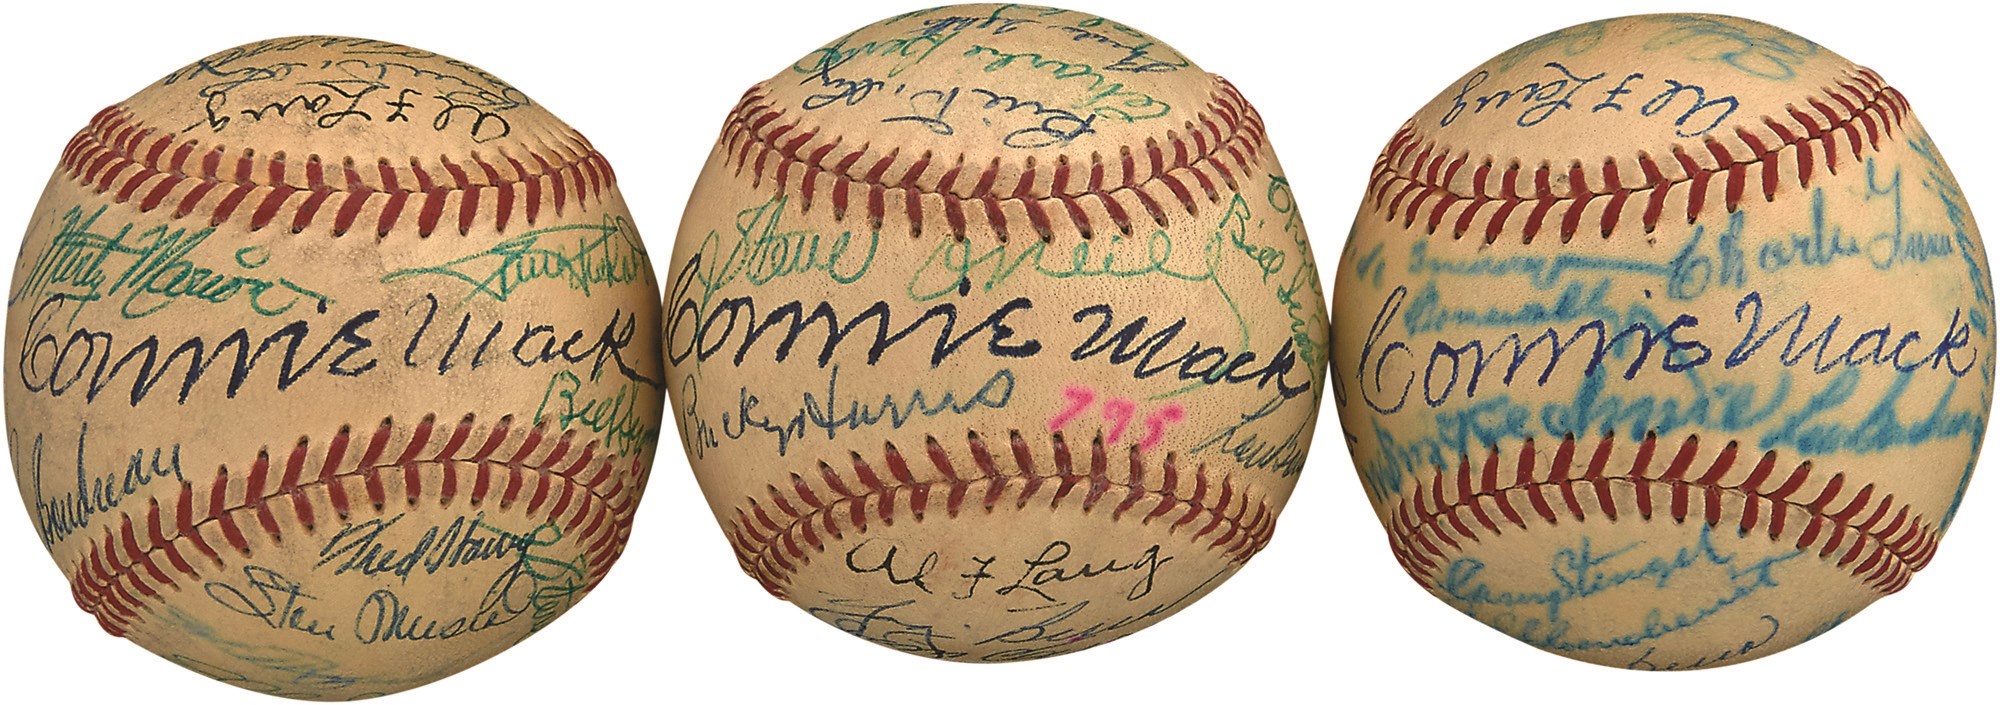 The John O'connor Signed Baseball Collection - Amazing 1950s Hall of Famers & Team-Signed Baseballs w/Jimmie Foxx & Connie Mack (3) (PSA)